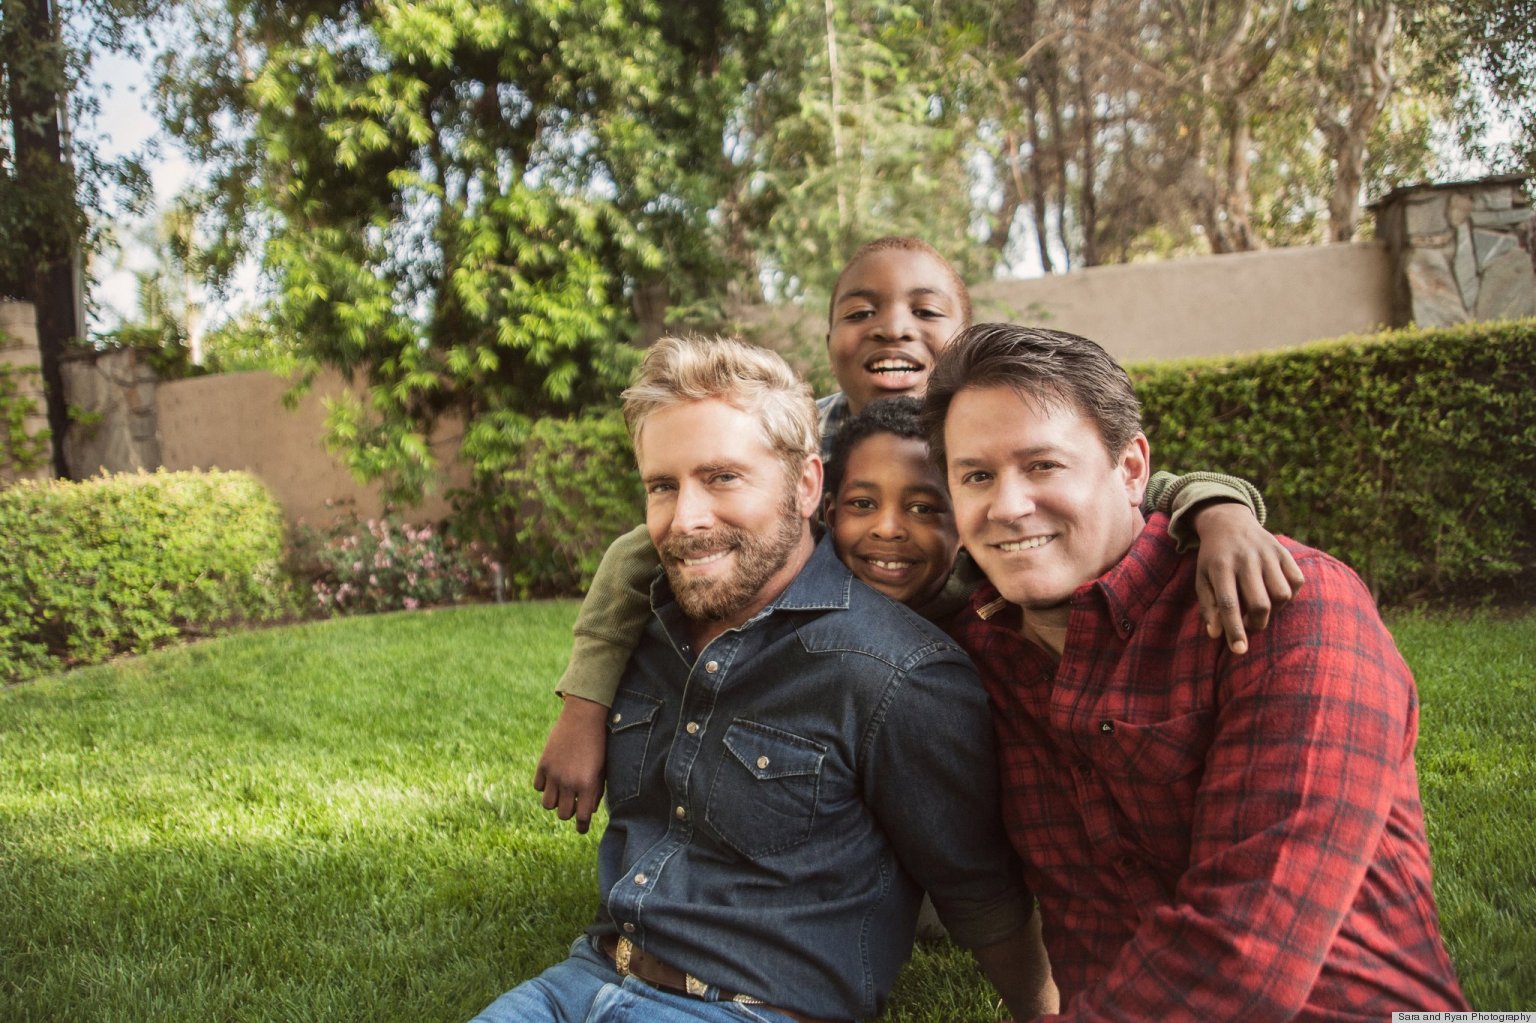 Everything You Always Wanted to Know About Photographing LGBT Families